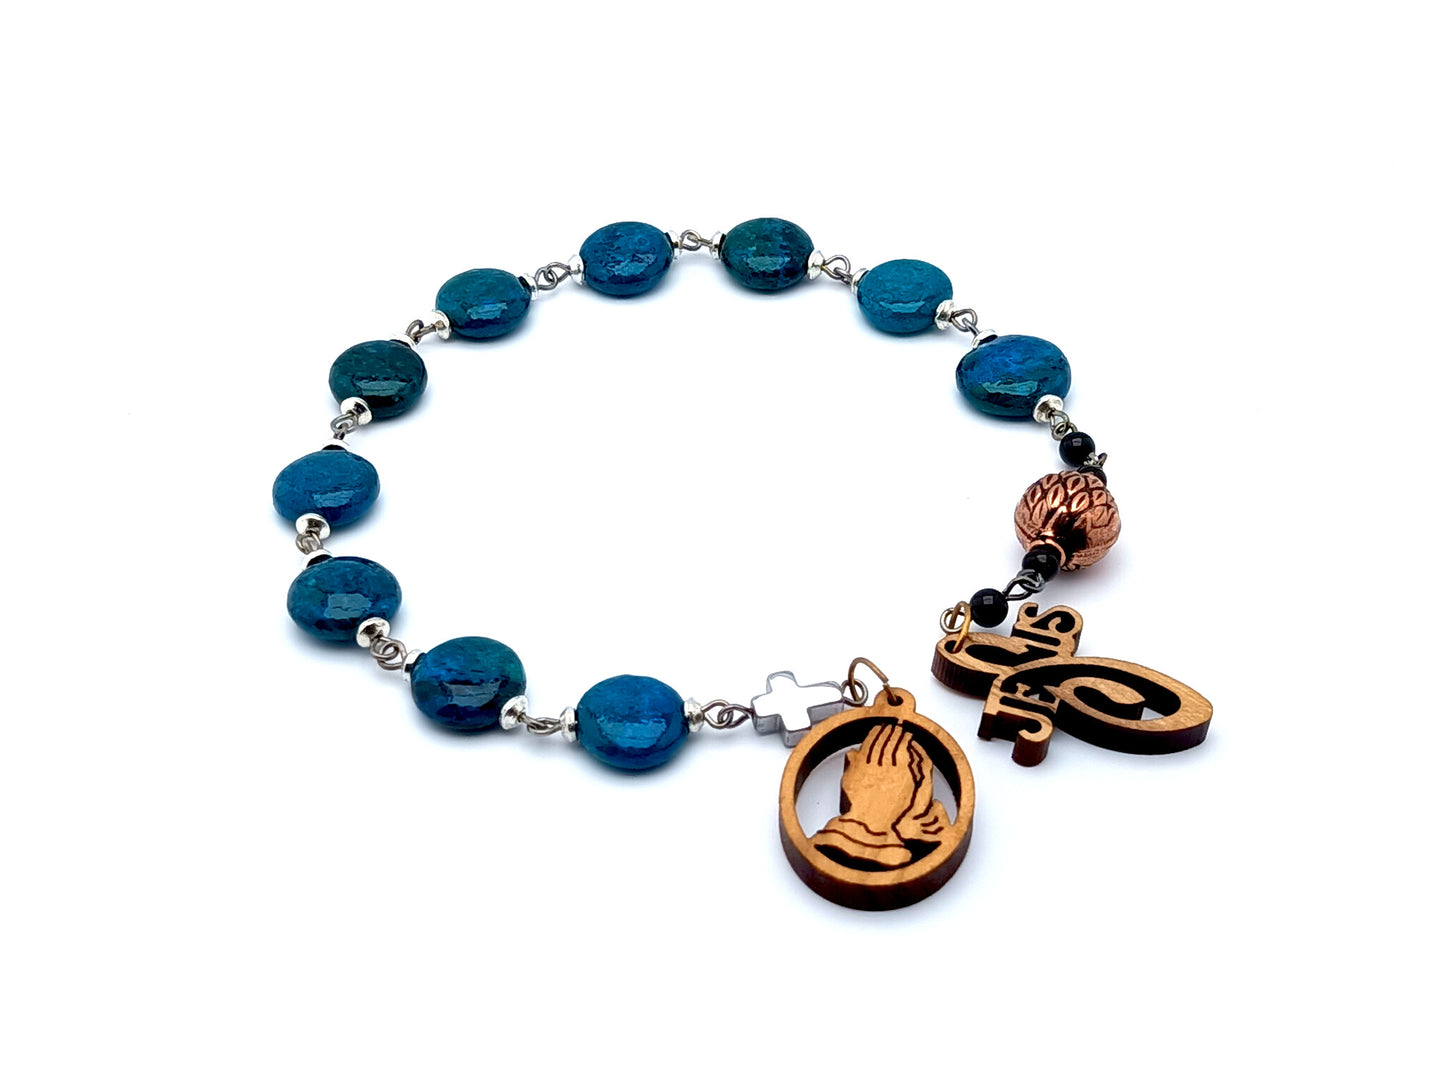 Praying Hands in olive wood and chrysocolla gemstone single decade tenner rosary beads, pocket rosaries.